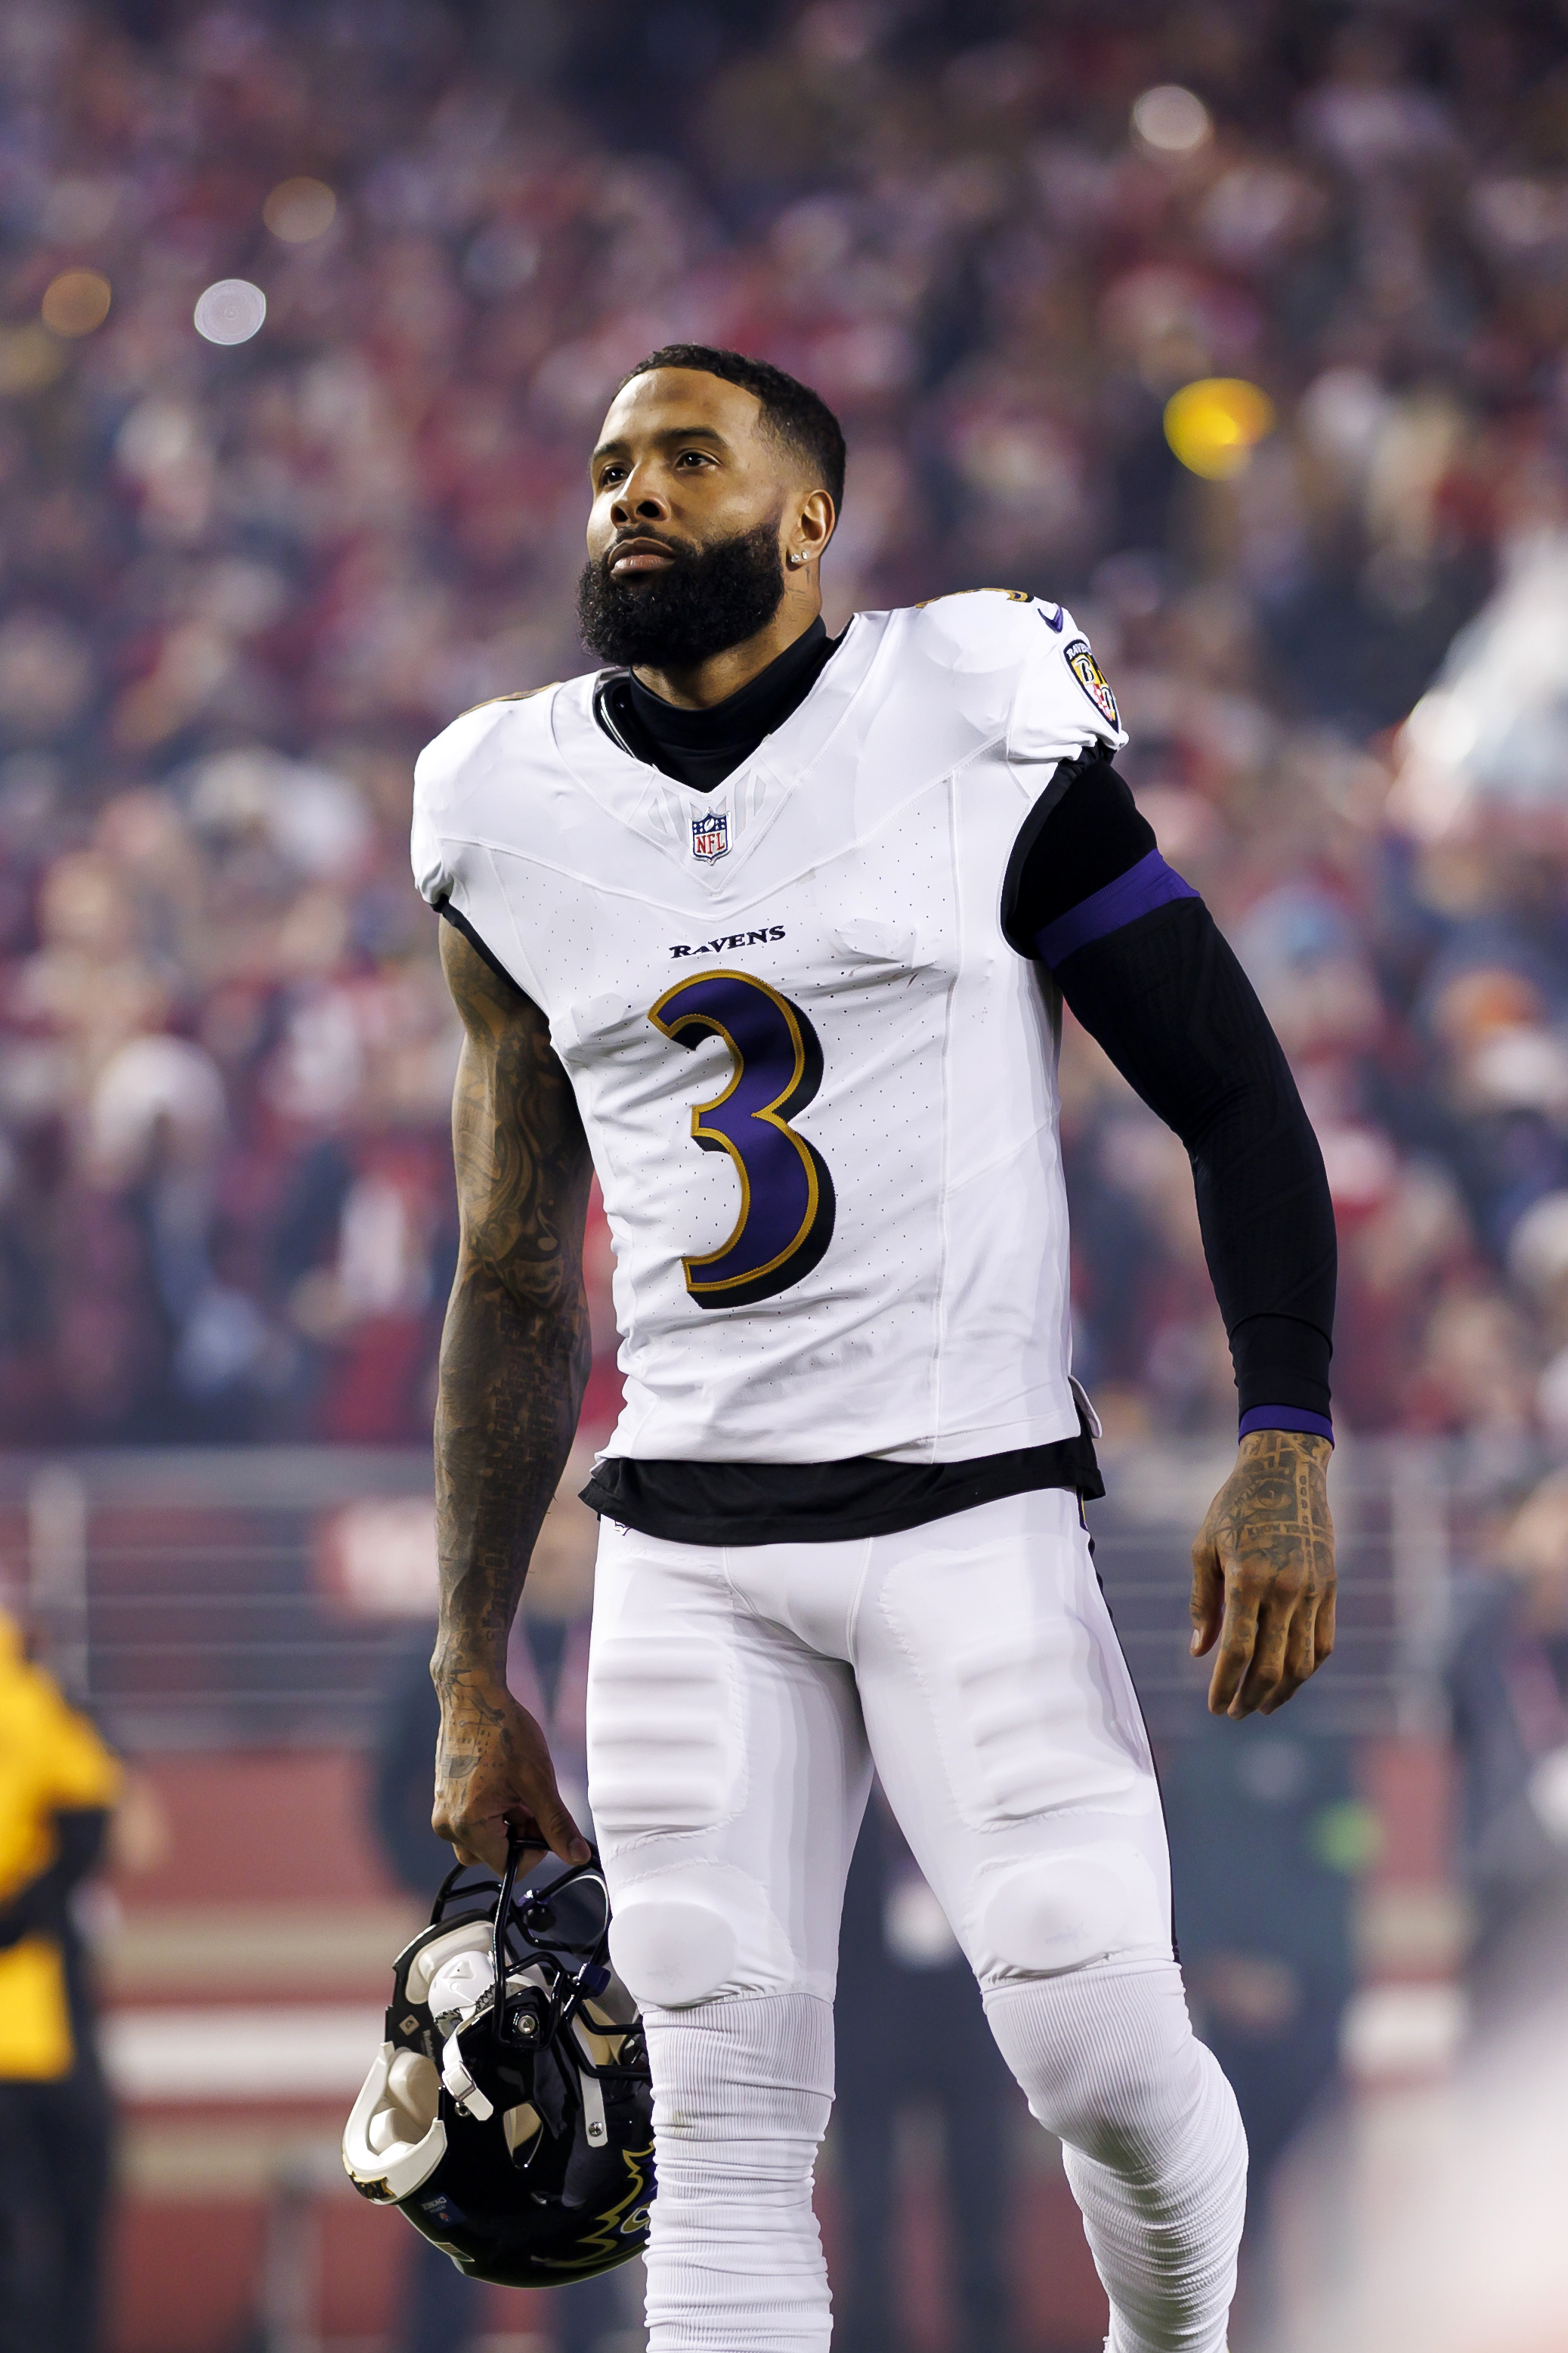 Odell is the wide receiver for the Baltimore Ravens